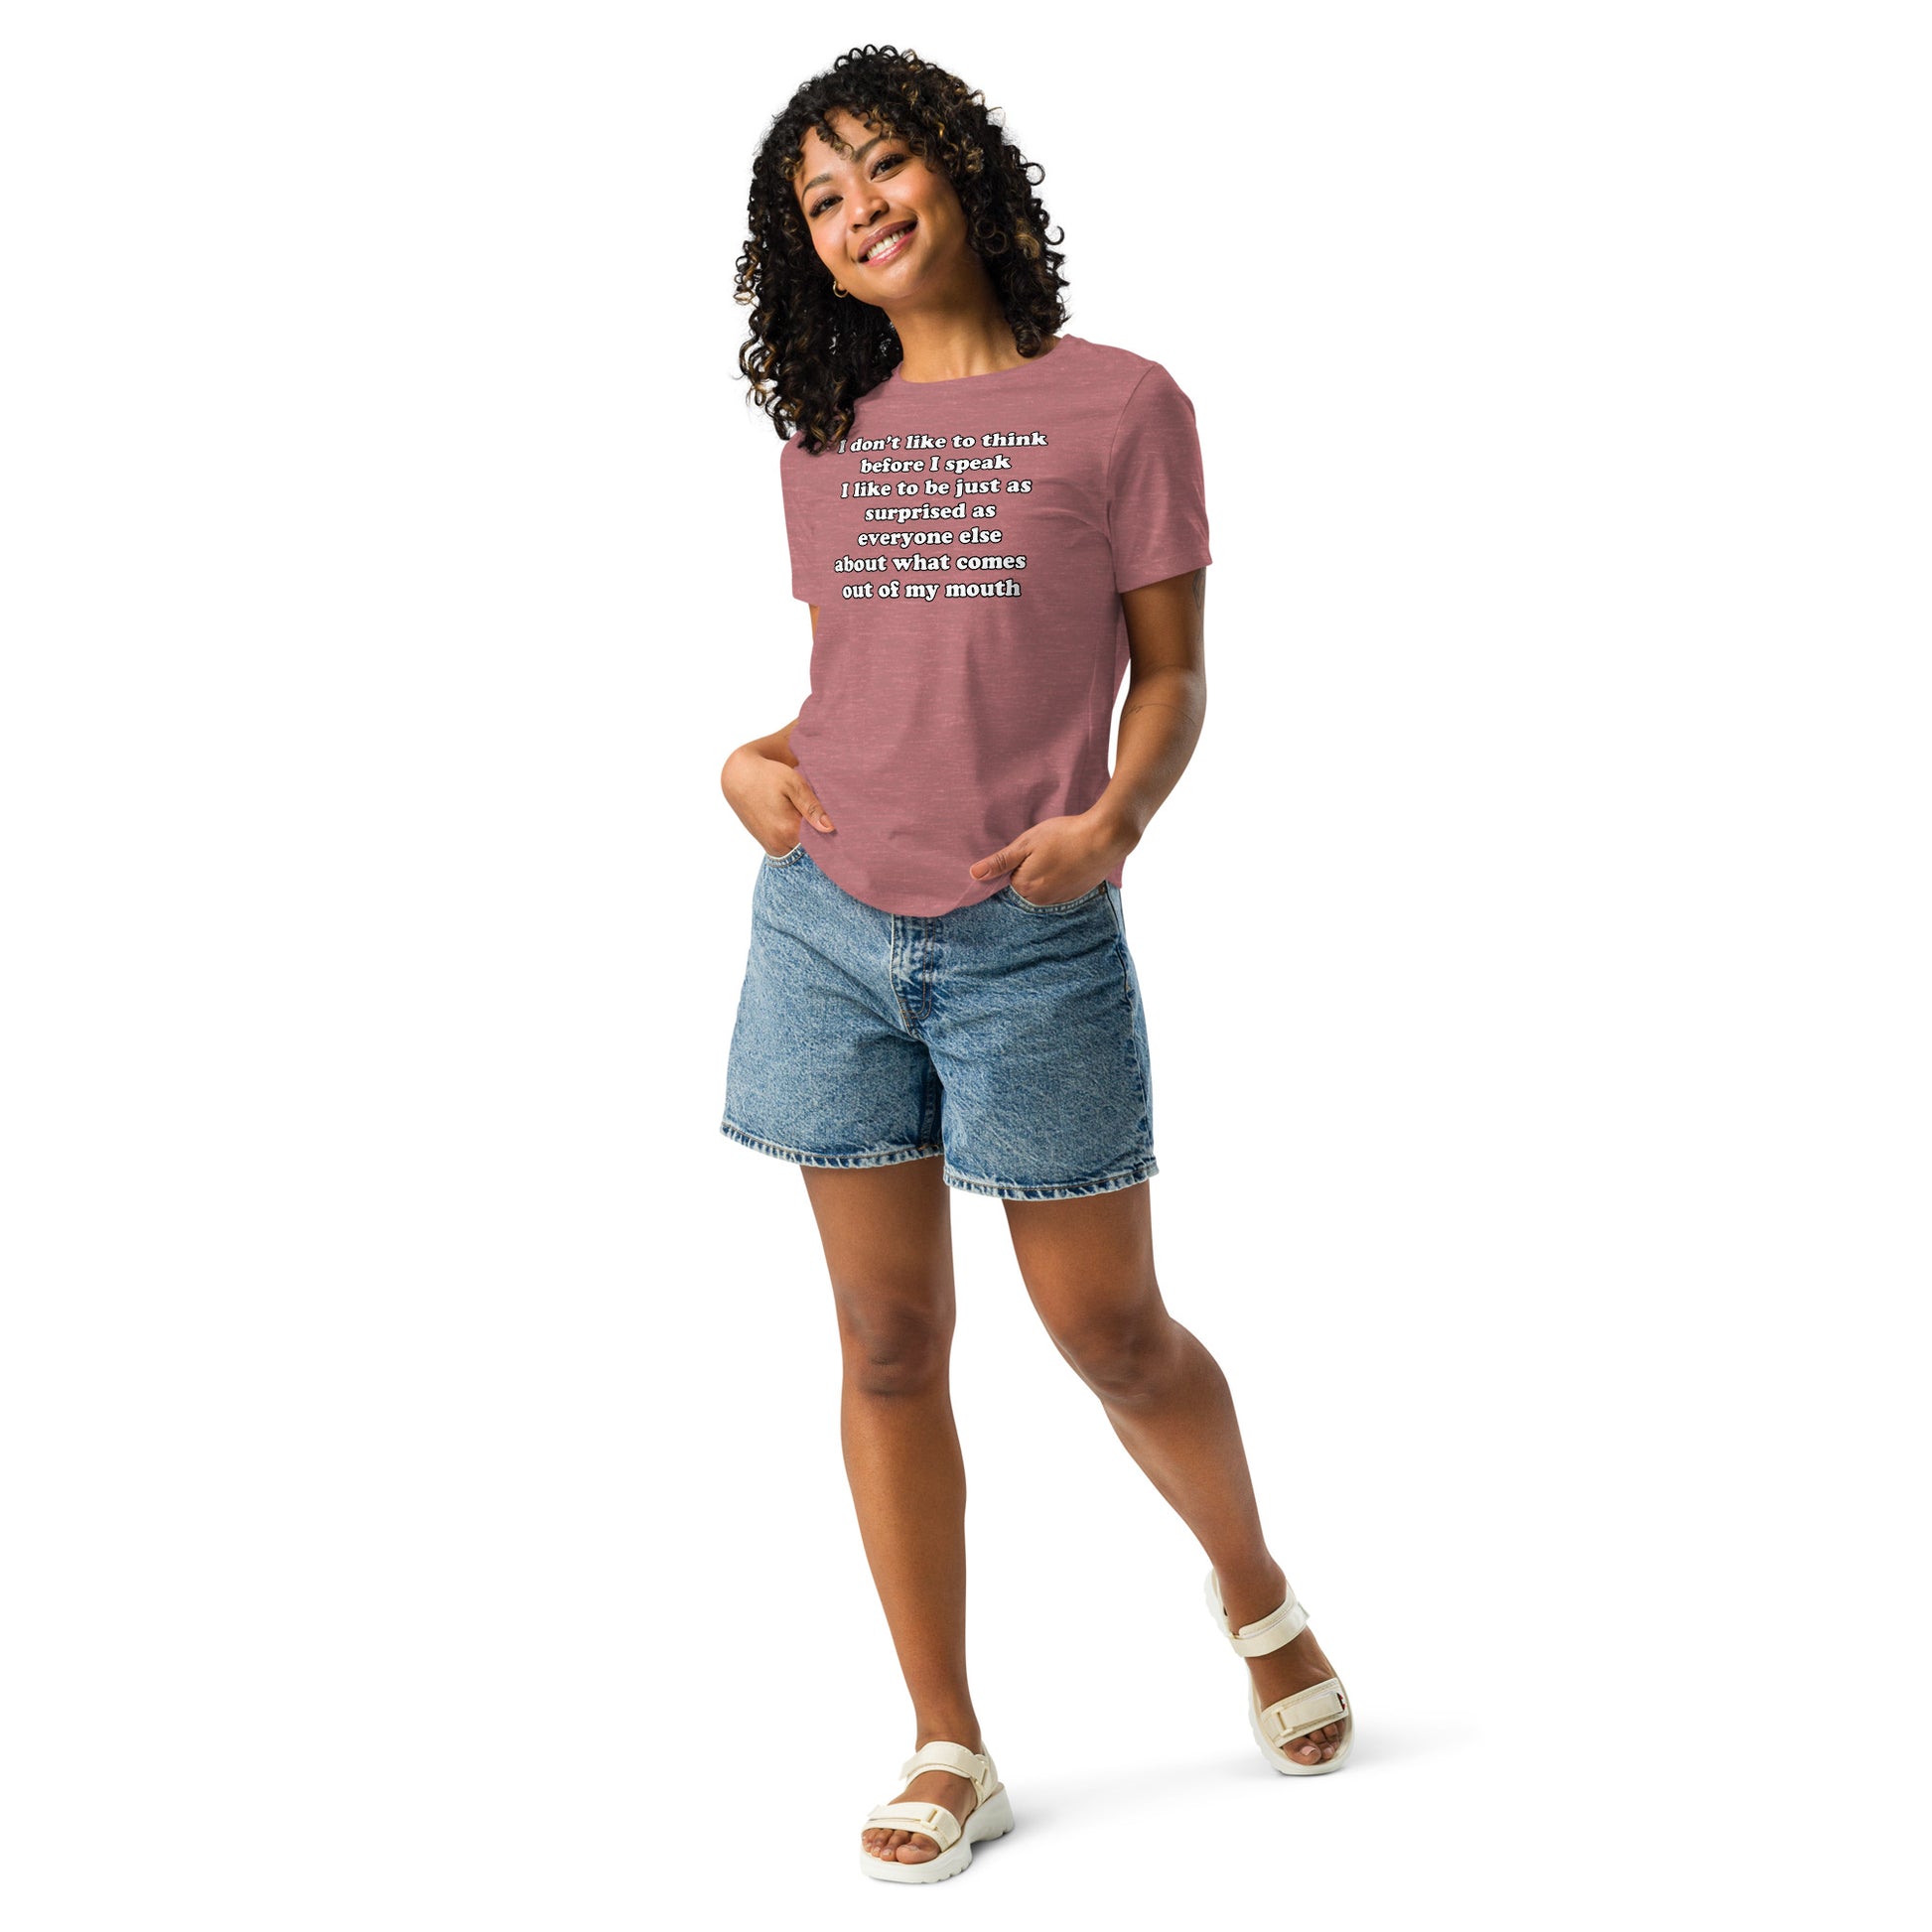 Woman with mauve t-shirt with text “I don't think before I speak Just as serprised as everyone about what comes out of my mouth"